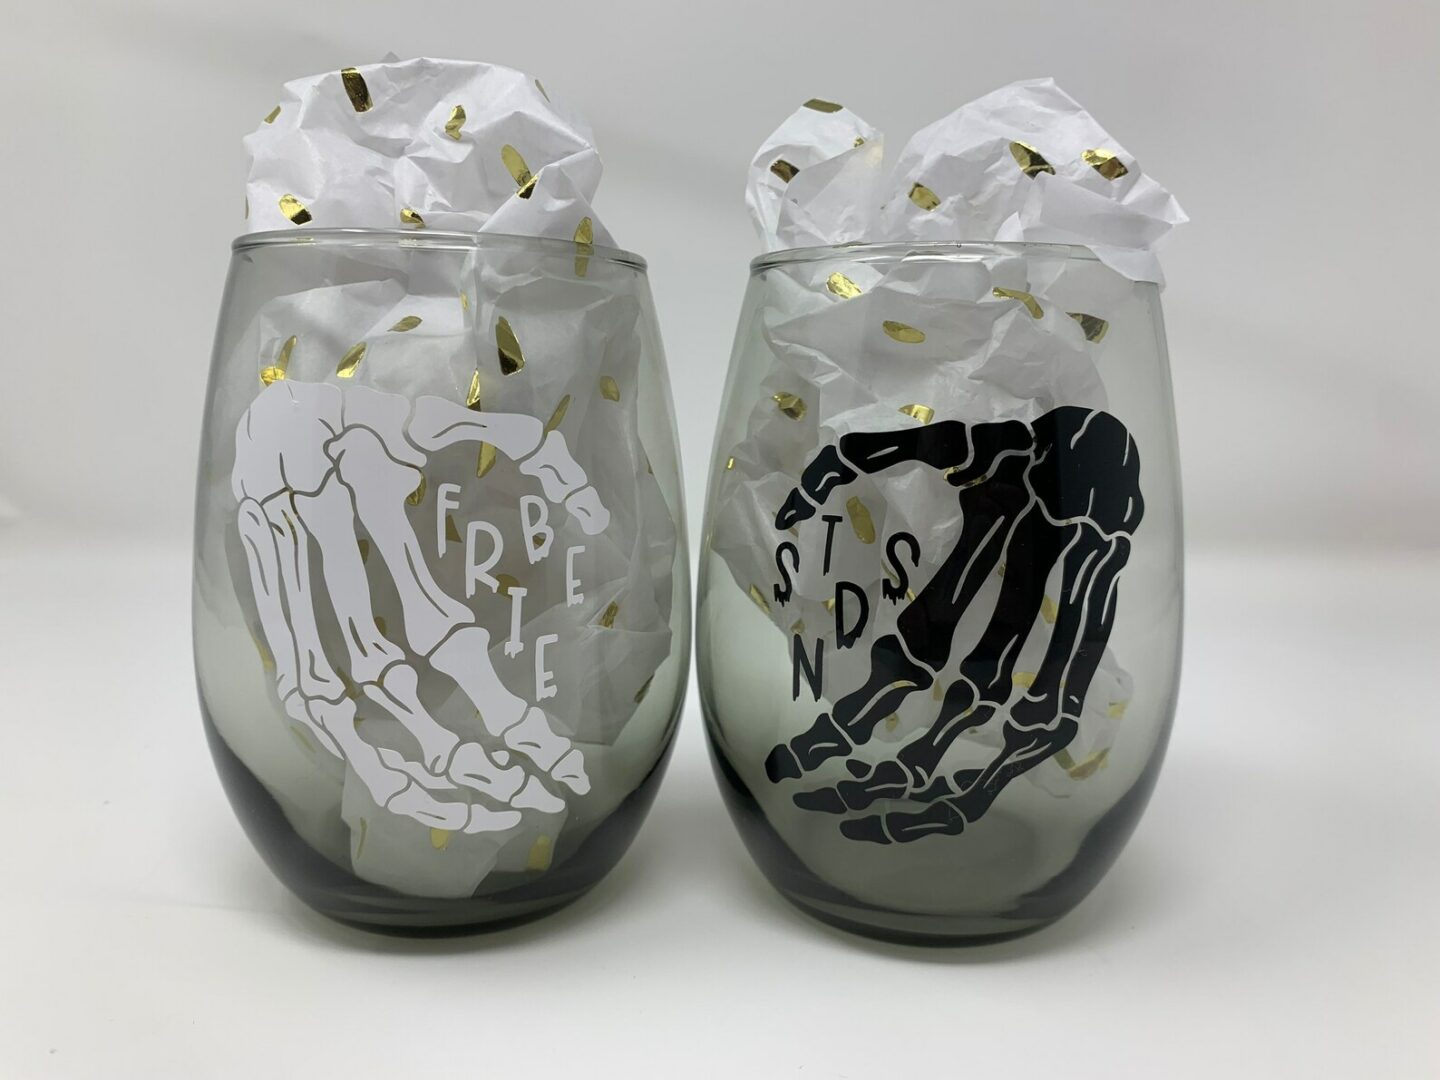 Two best friend skeleton hands cheers-ing two stemless wine glasses